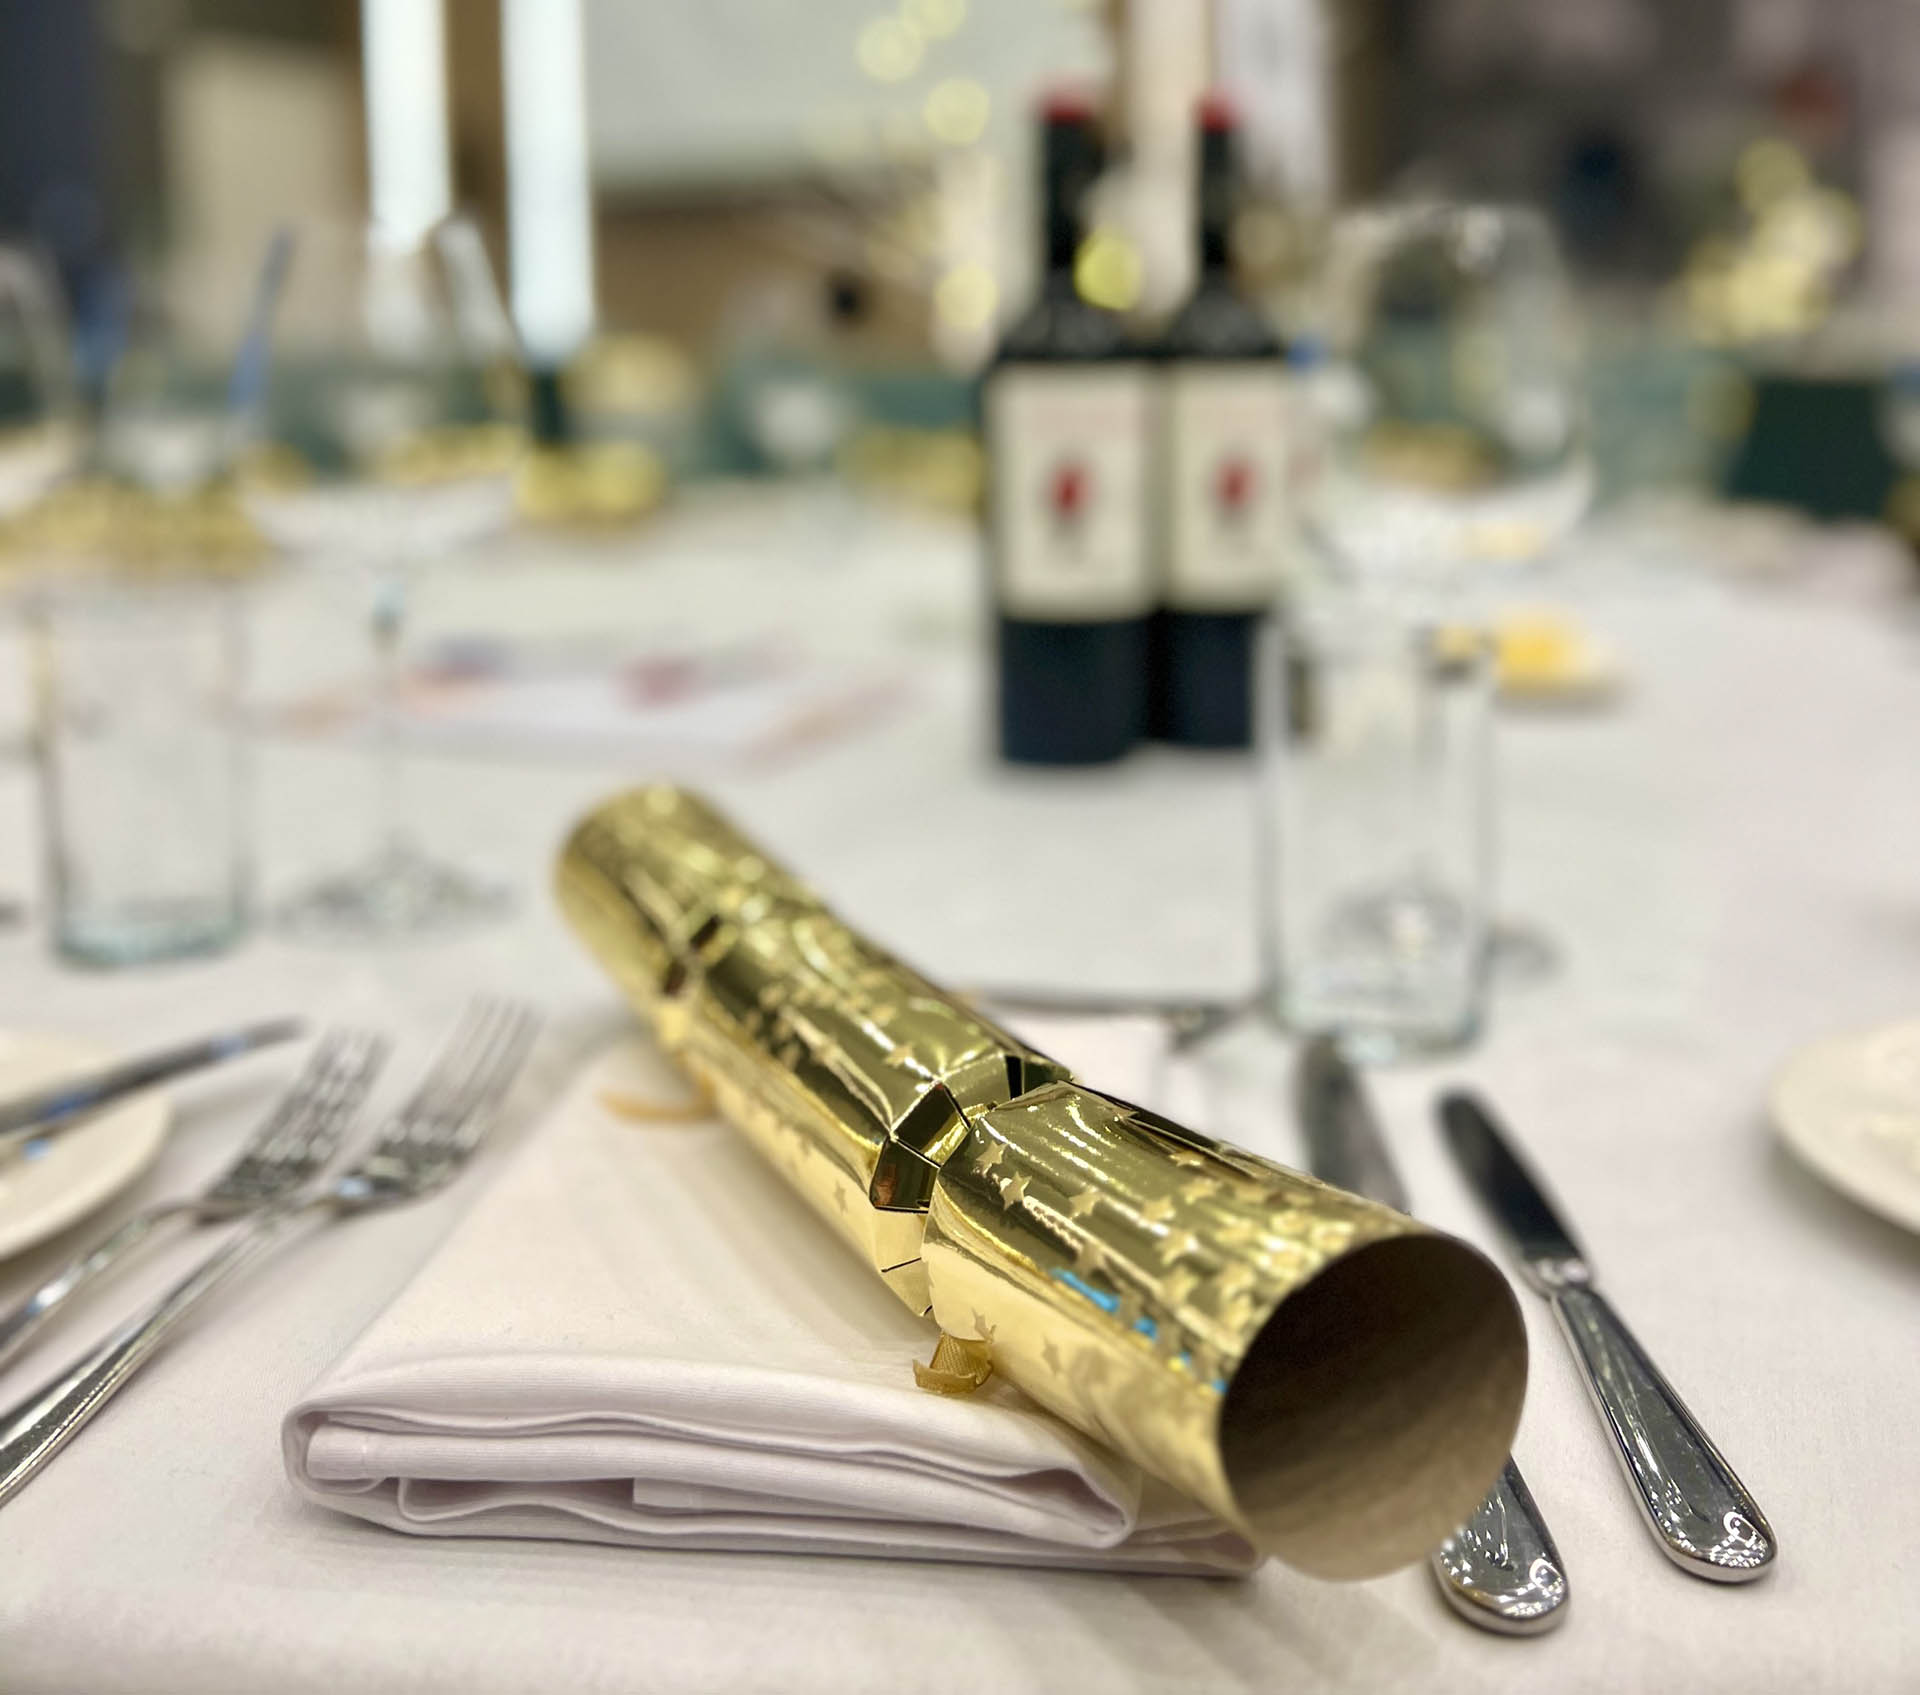 A Christmas Cracker on a table laid up for a meal